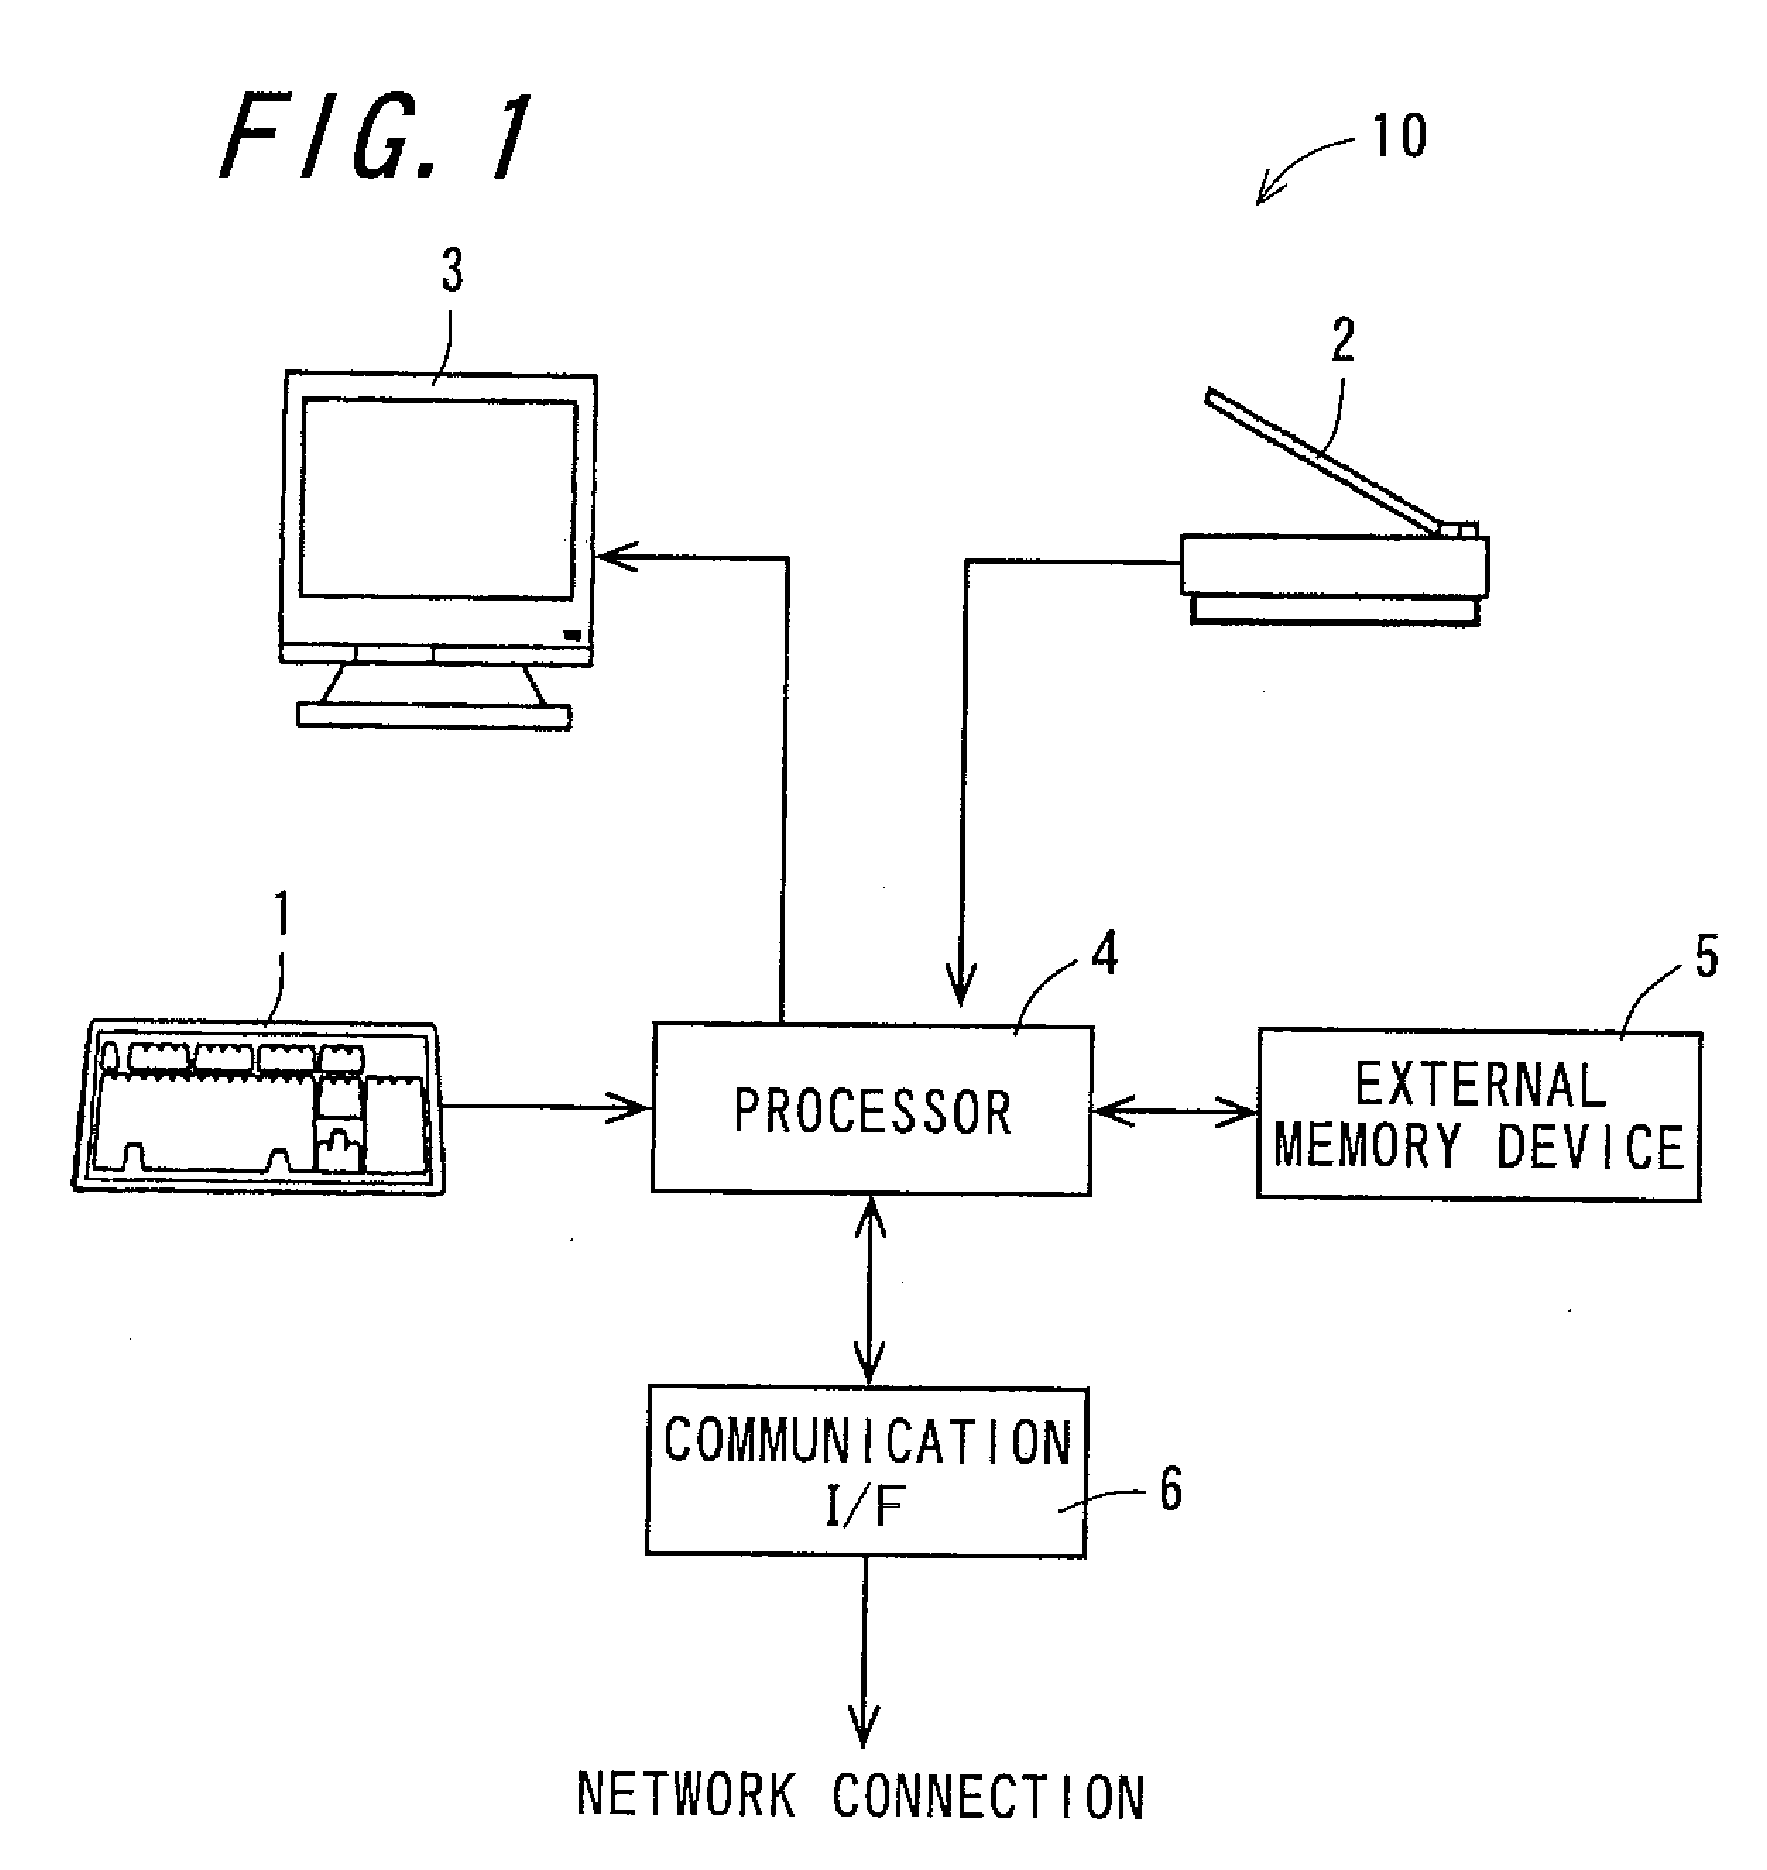 Image searching apparatus and image searching method